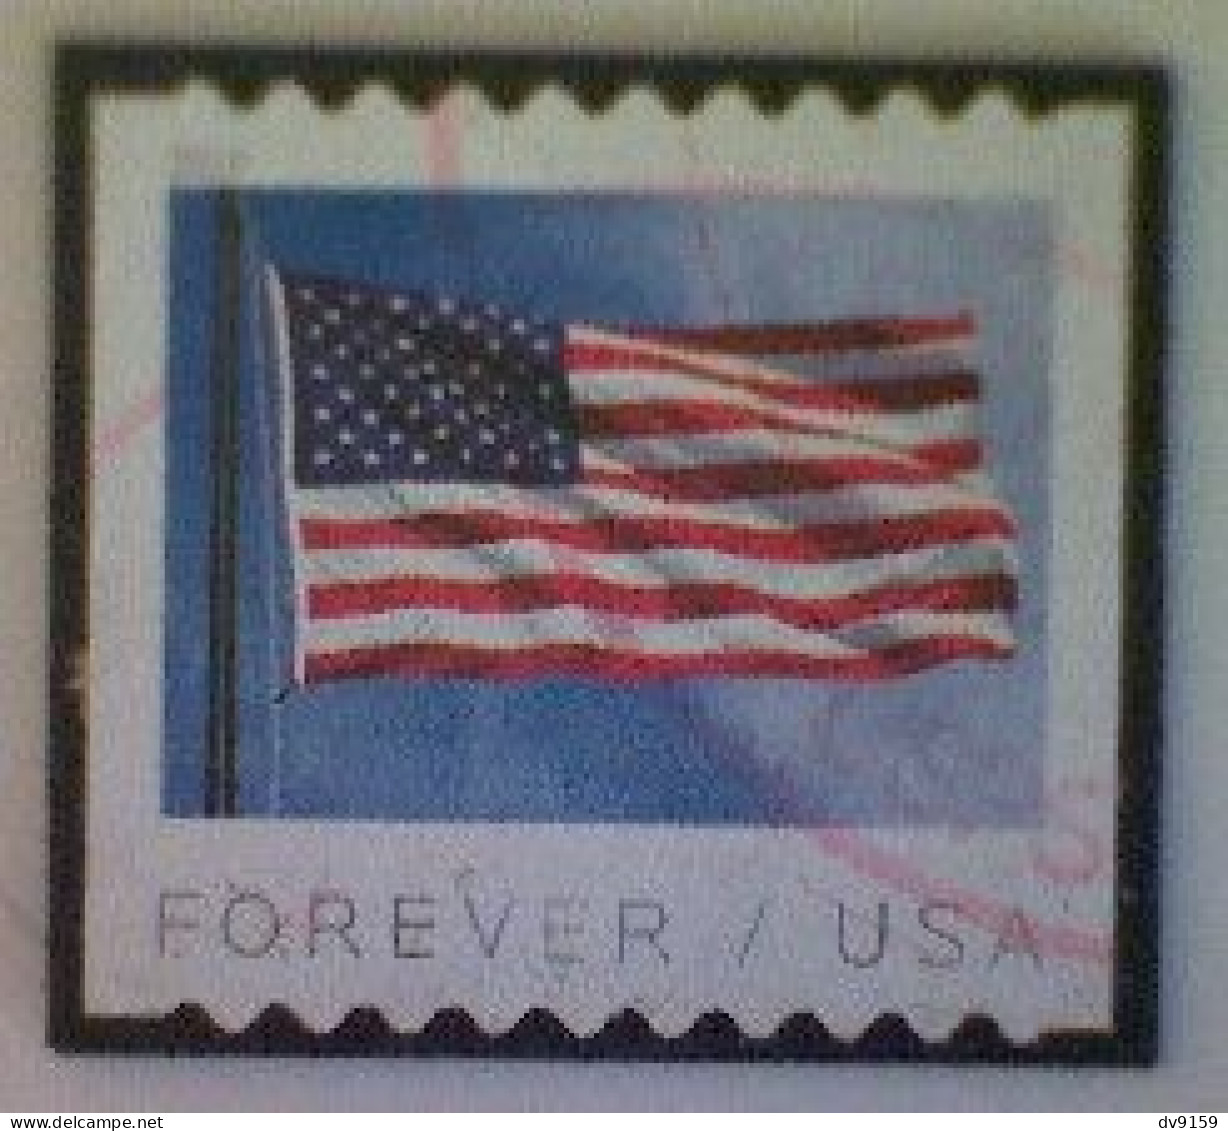 United States, Scott #5342, Used(o) Coil, 2019, Flag Definitive, (55¢) - Used Stamps